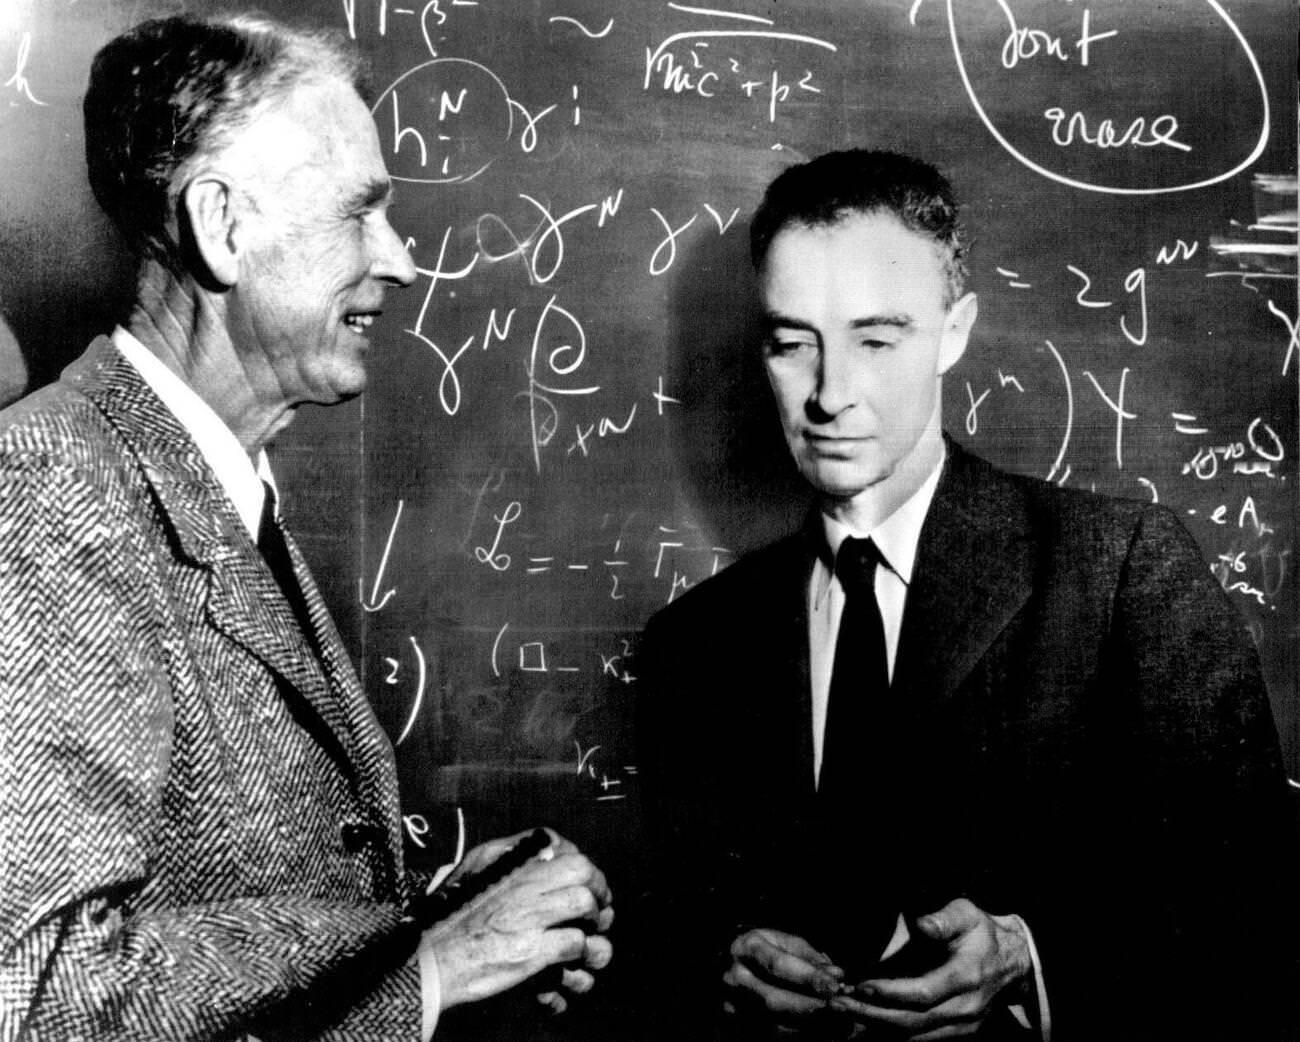 Dr. Robert Oppenheimer with Prof. Oswald Veblen as he begins his role as director of the Institute for Advanced Study, October 16, 1947.